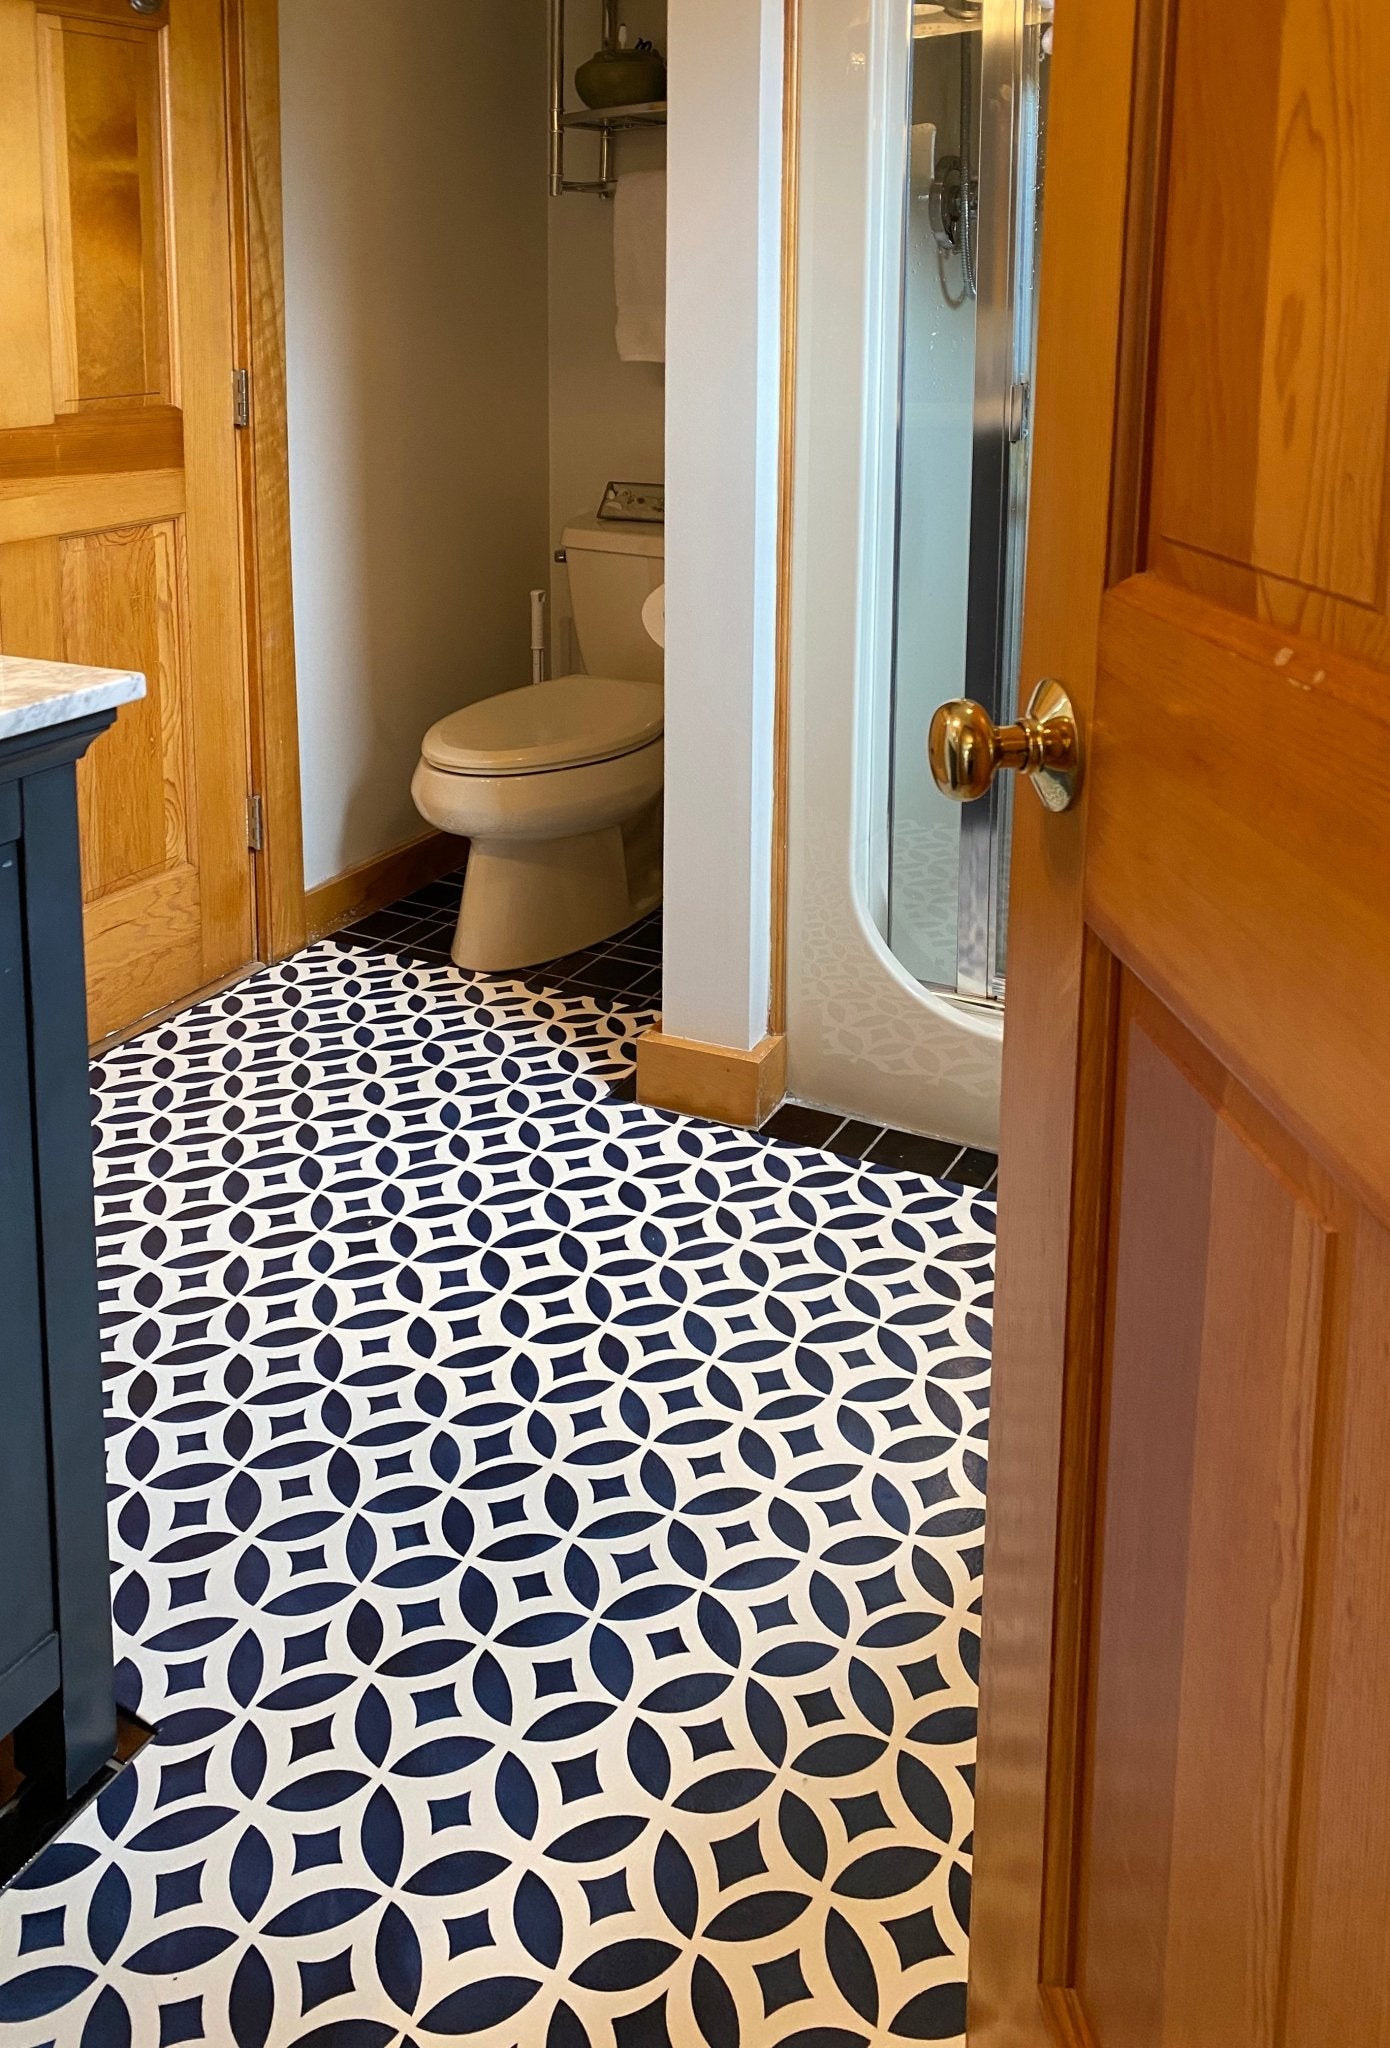 Shaped floorcloth with interlocking circle pattern installed in bathroom-differrent angle.